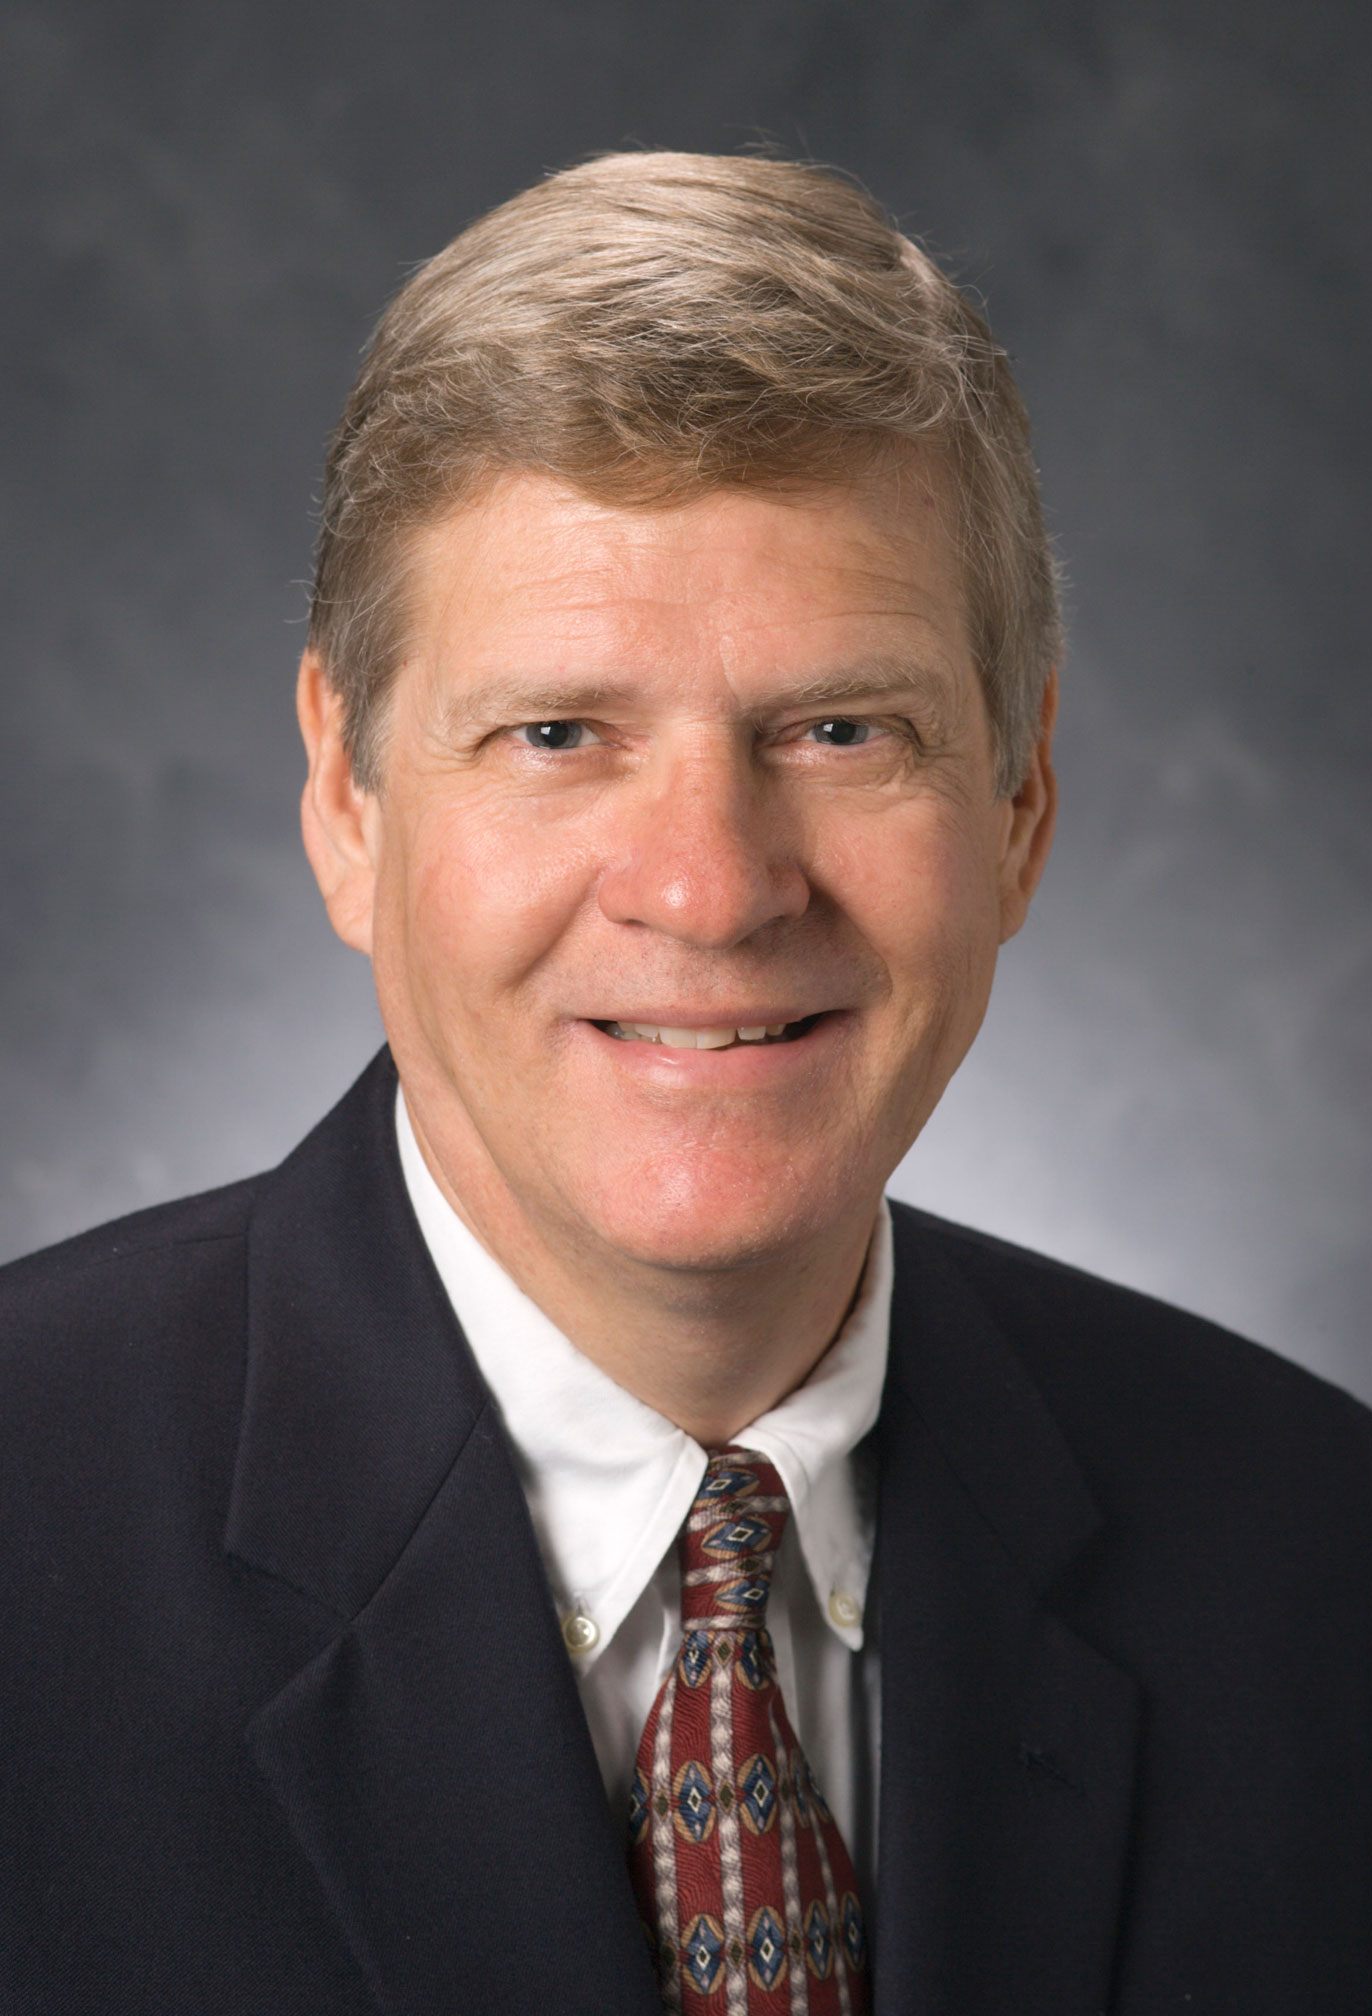 UGA Public Health Dean invited to serve on CDC Board of Scientific Counselors